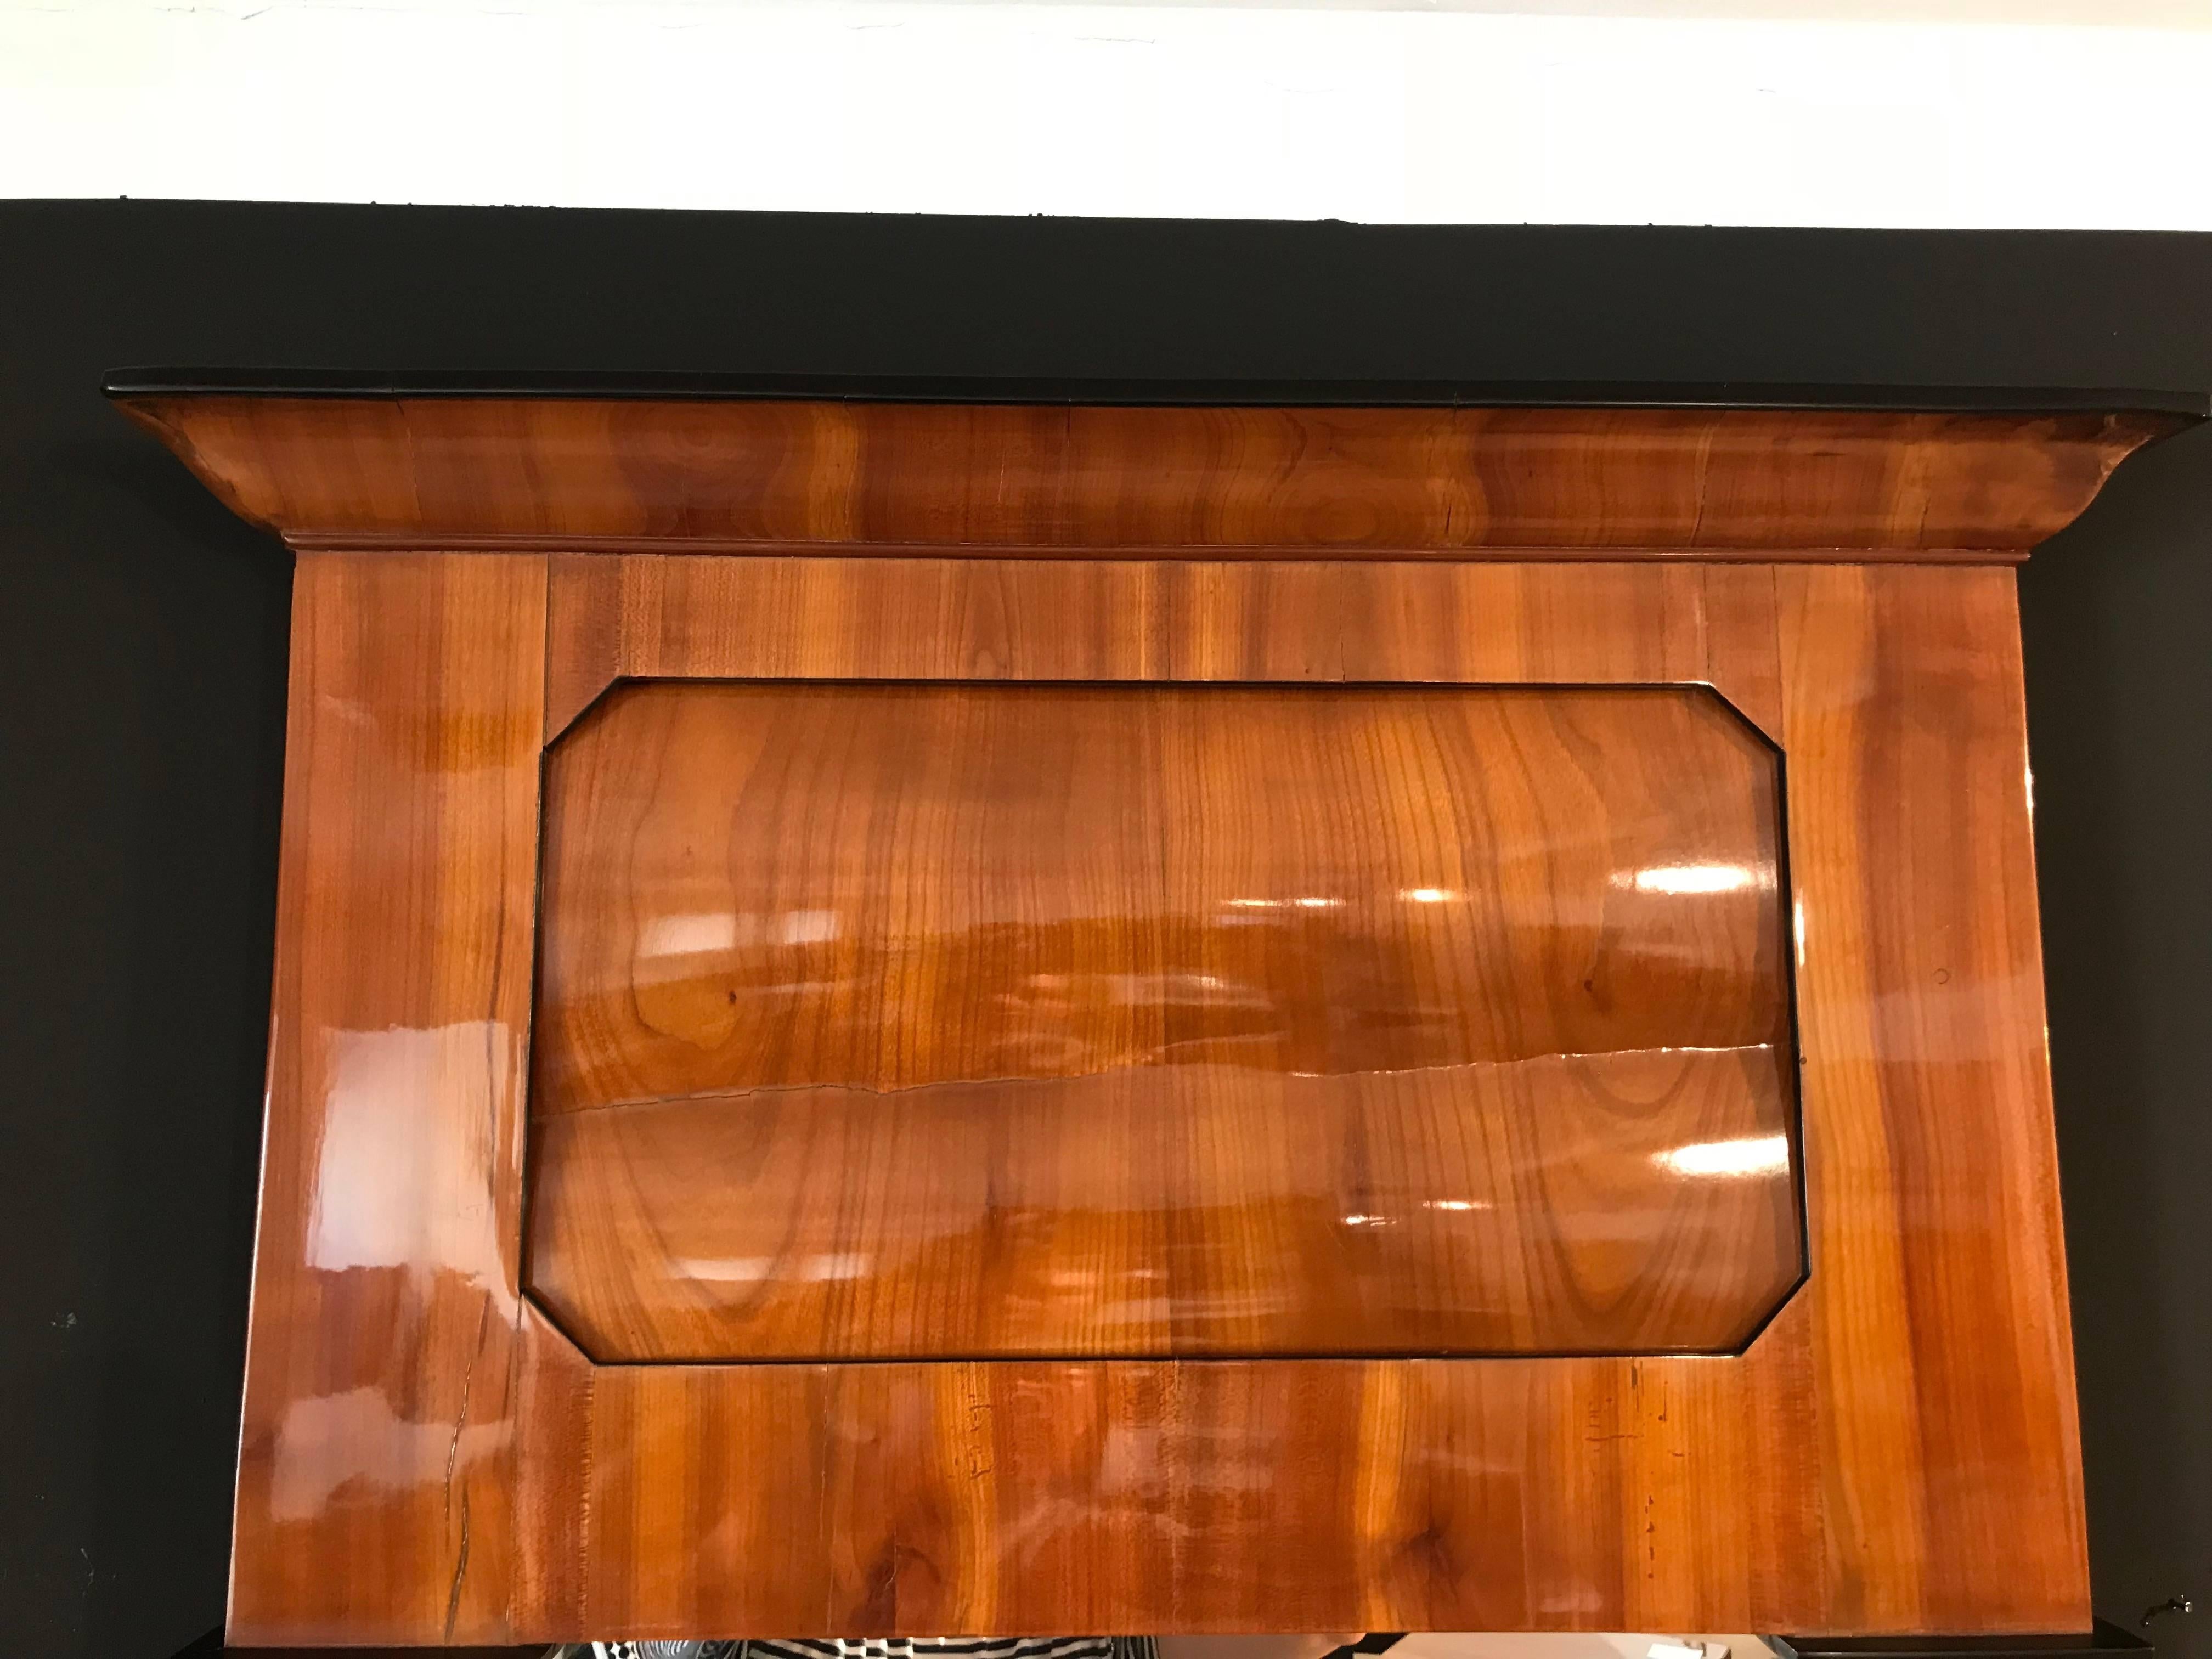 Very beautiful and elegant Biedermeier mirror with cherry veneer. It has some ebonized parts at the pilaster columns and original mirror glass. The wood has been hand-polished with shellac and has a great surface. The width at the top is 67 cm, at